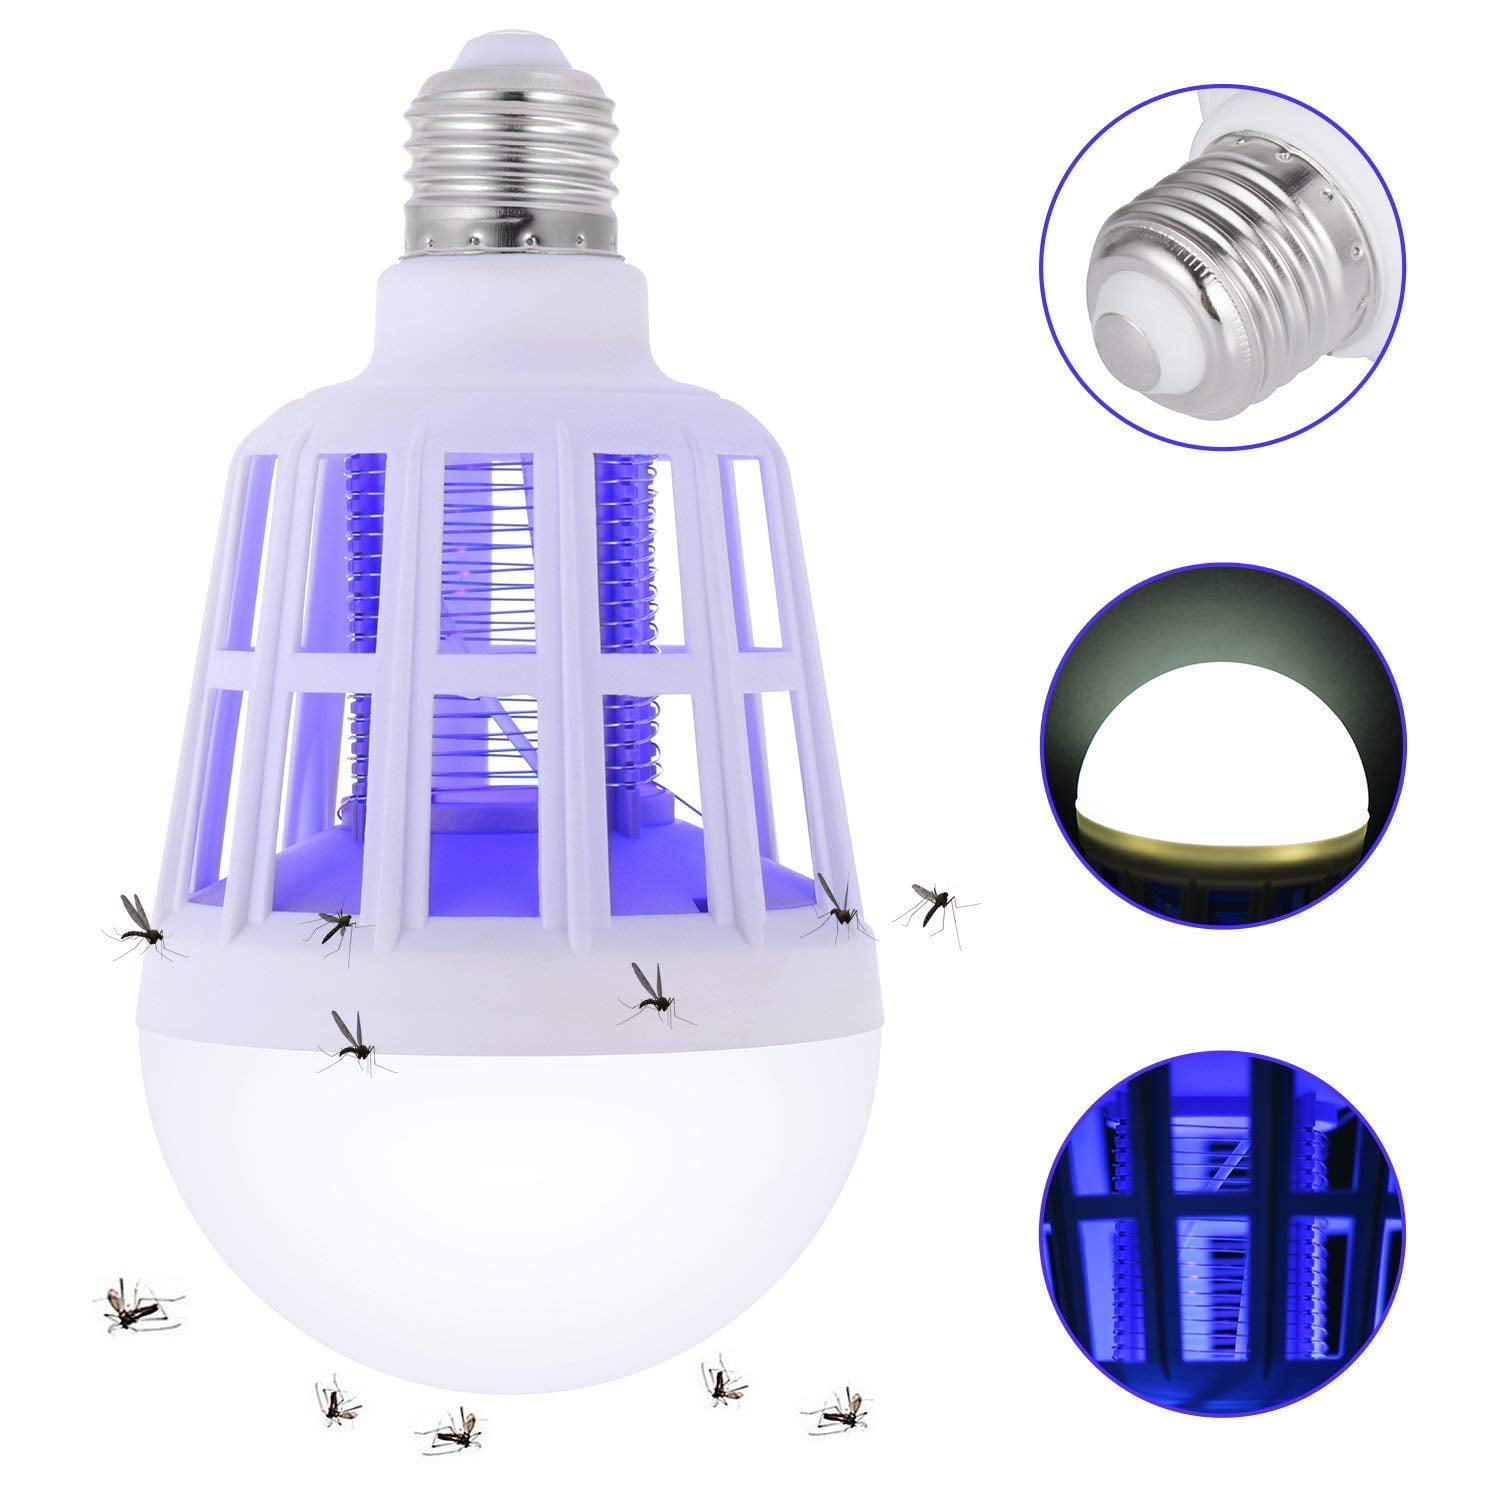 Details about   Indoor Outdoor Insect Bug Zapper Light Bulb Mosquito Trap Killer Fly Lamp U5S9 